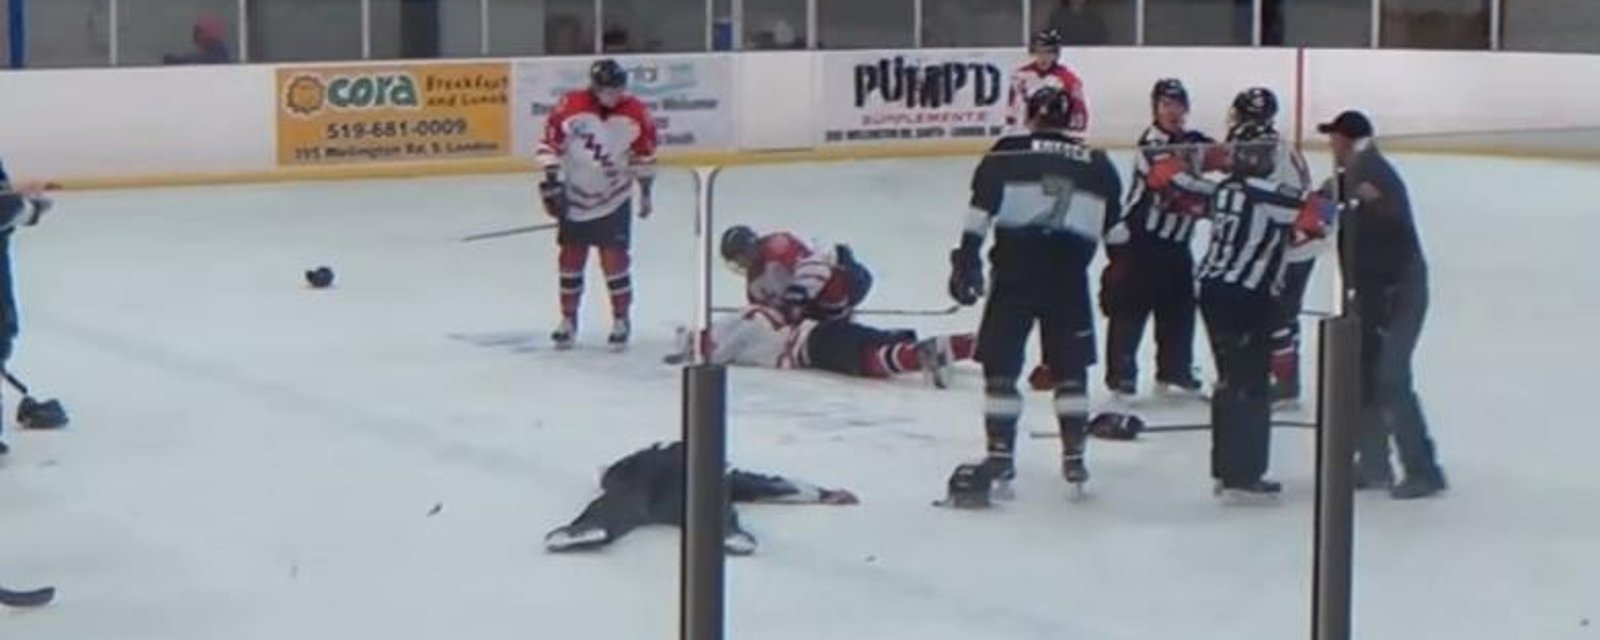 Referee loses his cool, punches player, trainer jumps off bench, attacks referee.